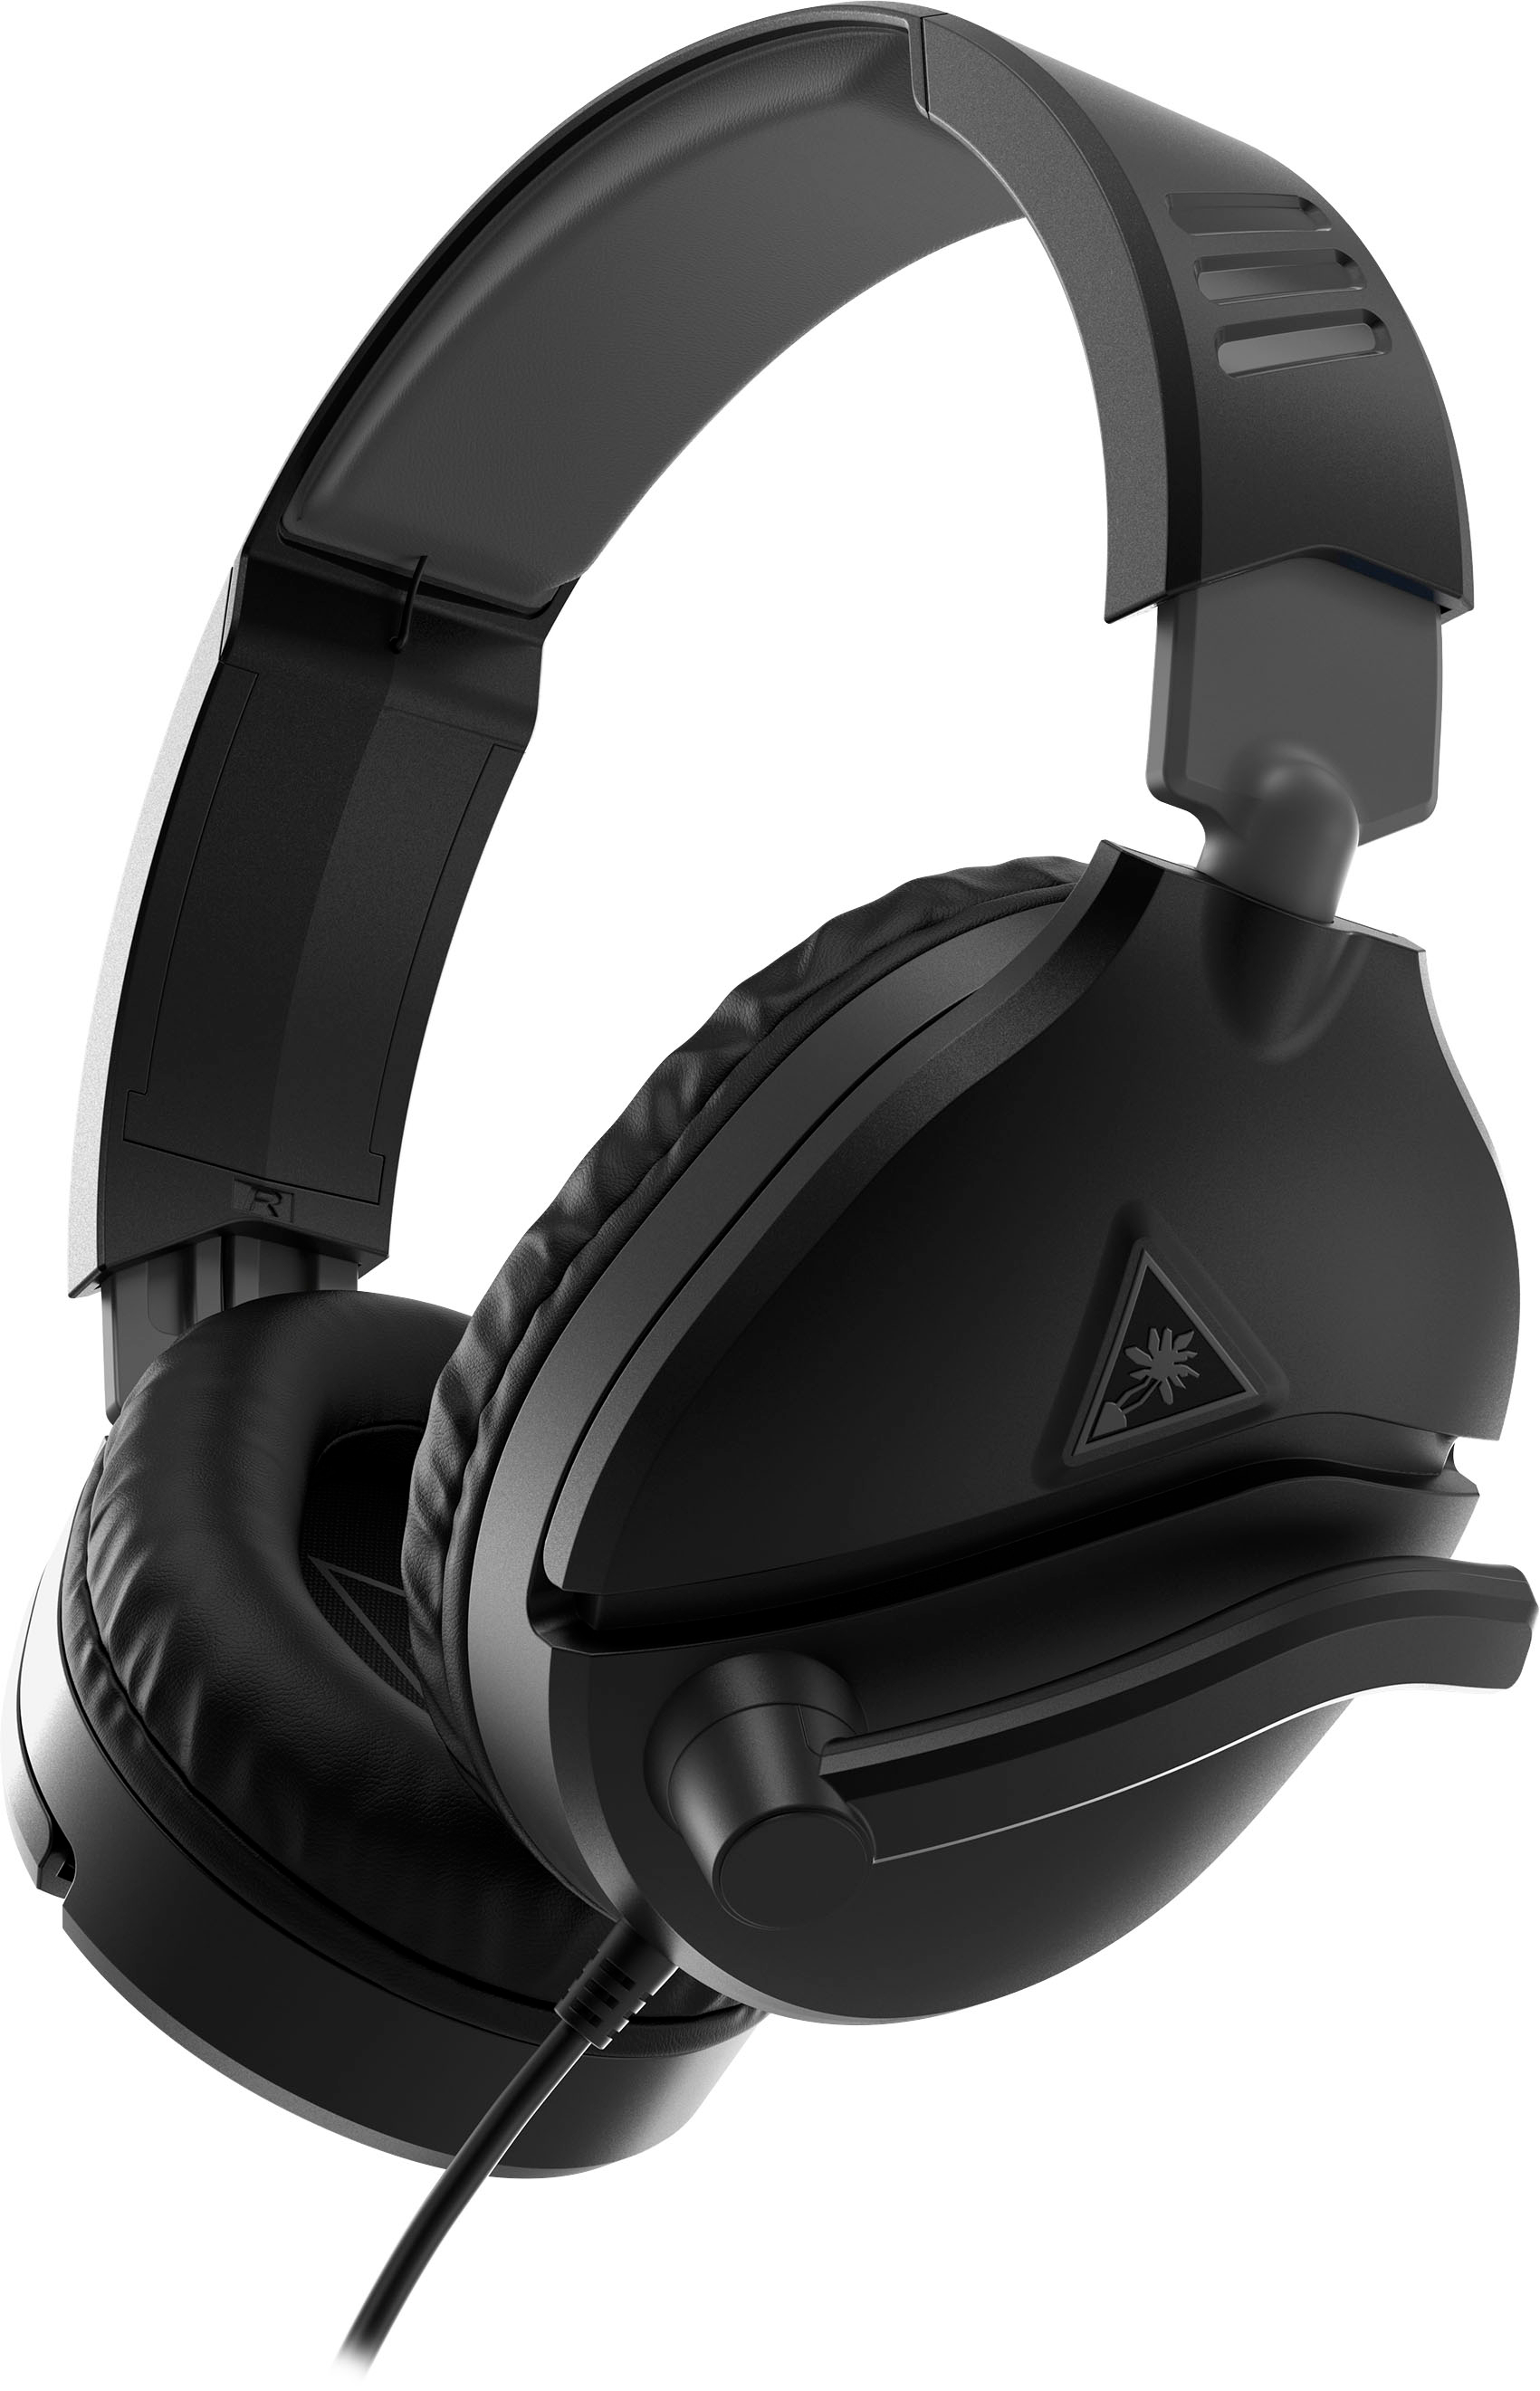 Angle View: Turtle Beach - Recon 70 Gaming Headset for Xbox Series X|S, Xbox One, PS5, PS4, Nintendo Switch, PC & Mobile w 3.5mm Wired Connection - Black